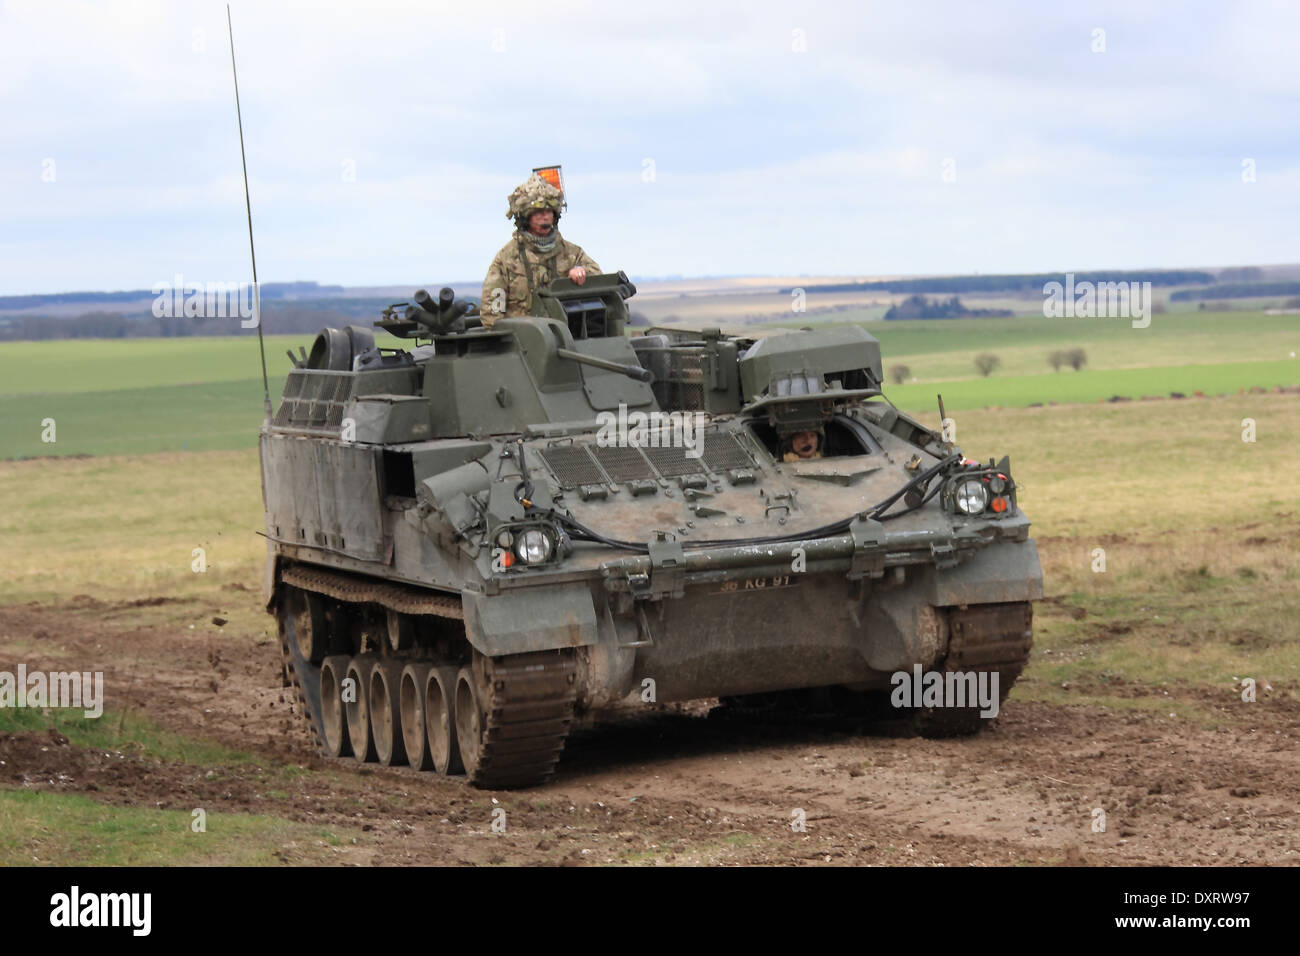 REME FV512 Mechanised Combat Repair Vehicle based the Warrior chassis travels cross country during maneuvers on Salisbury Plain Stock Photo